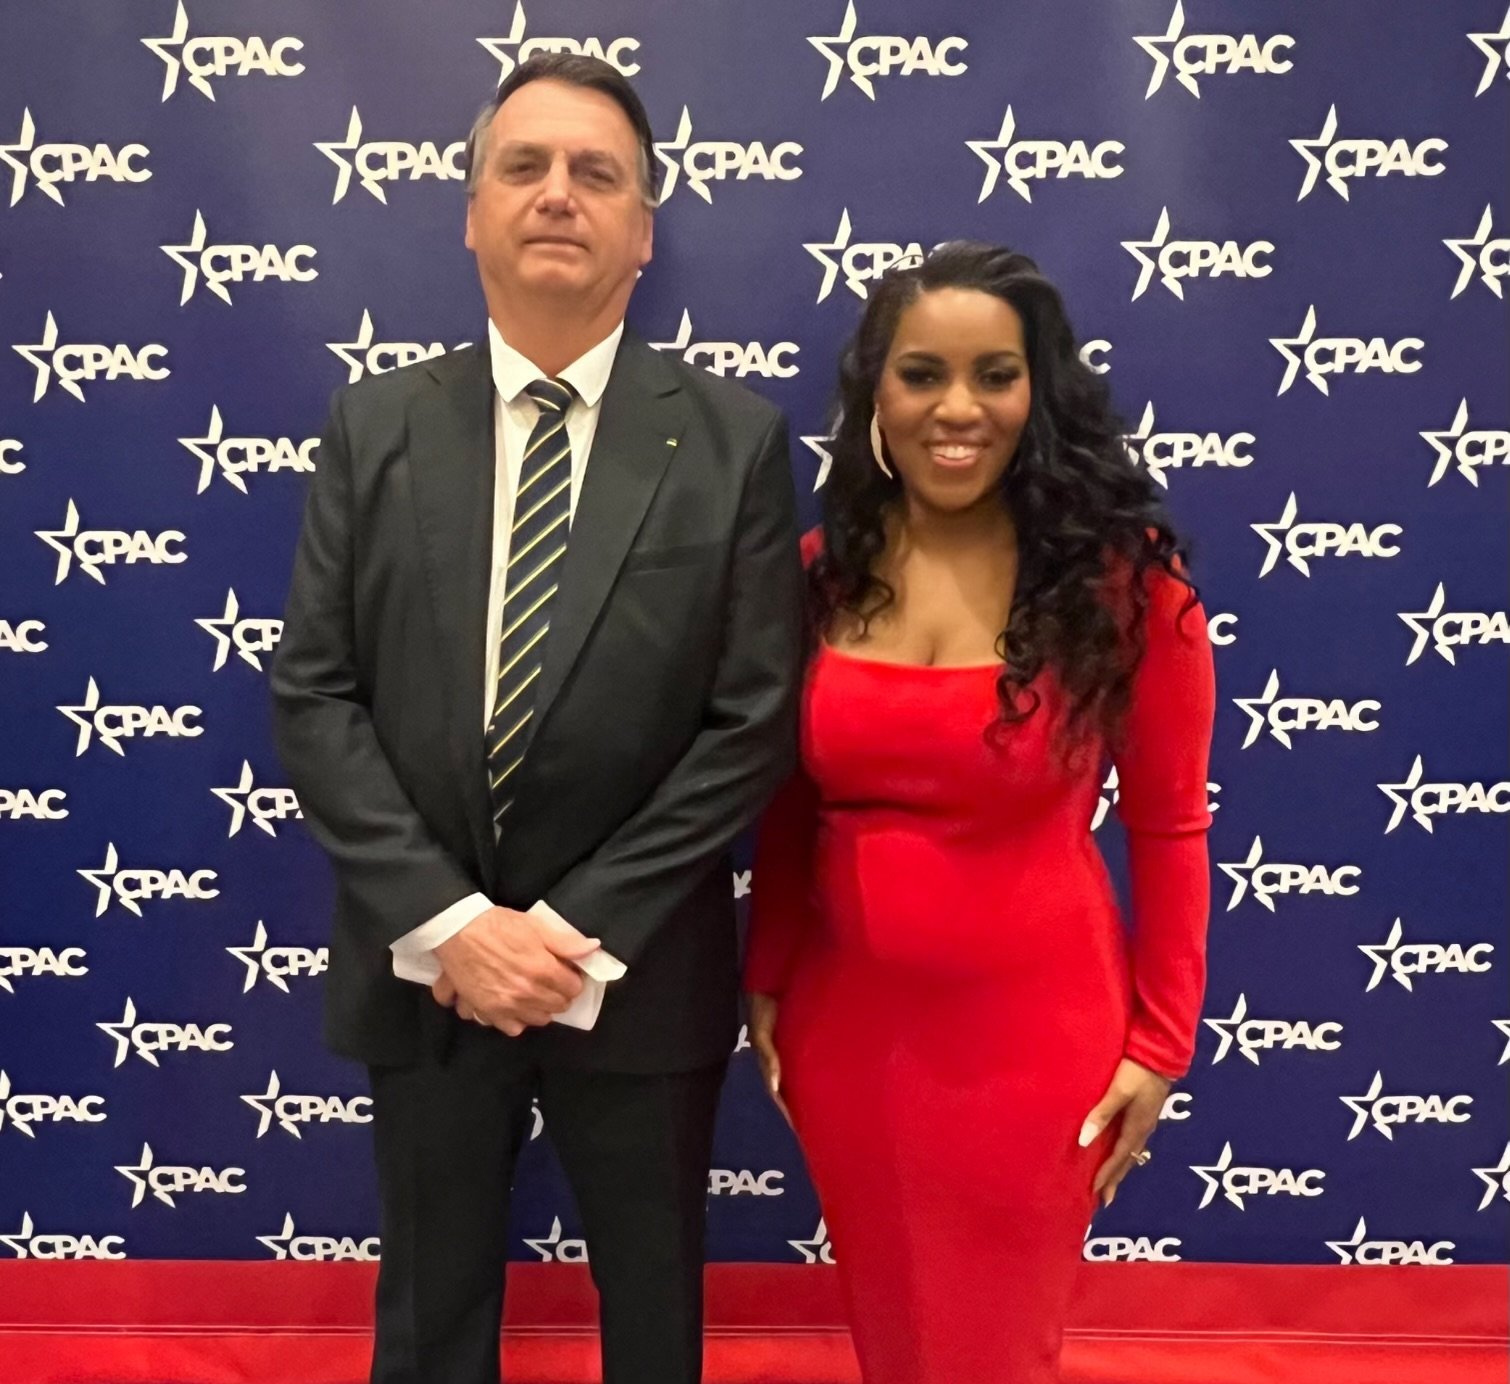 March 4th, 2023, Mary was featured entertainment for the 2023 CPAC  Convention in Washington, D.C. Mary pictured with former President of  Brazil, His Excellency Jair Bolsonaro.